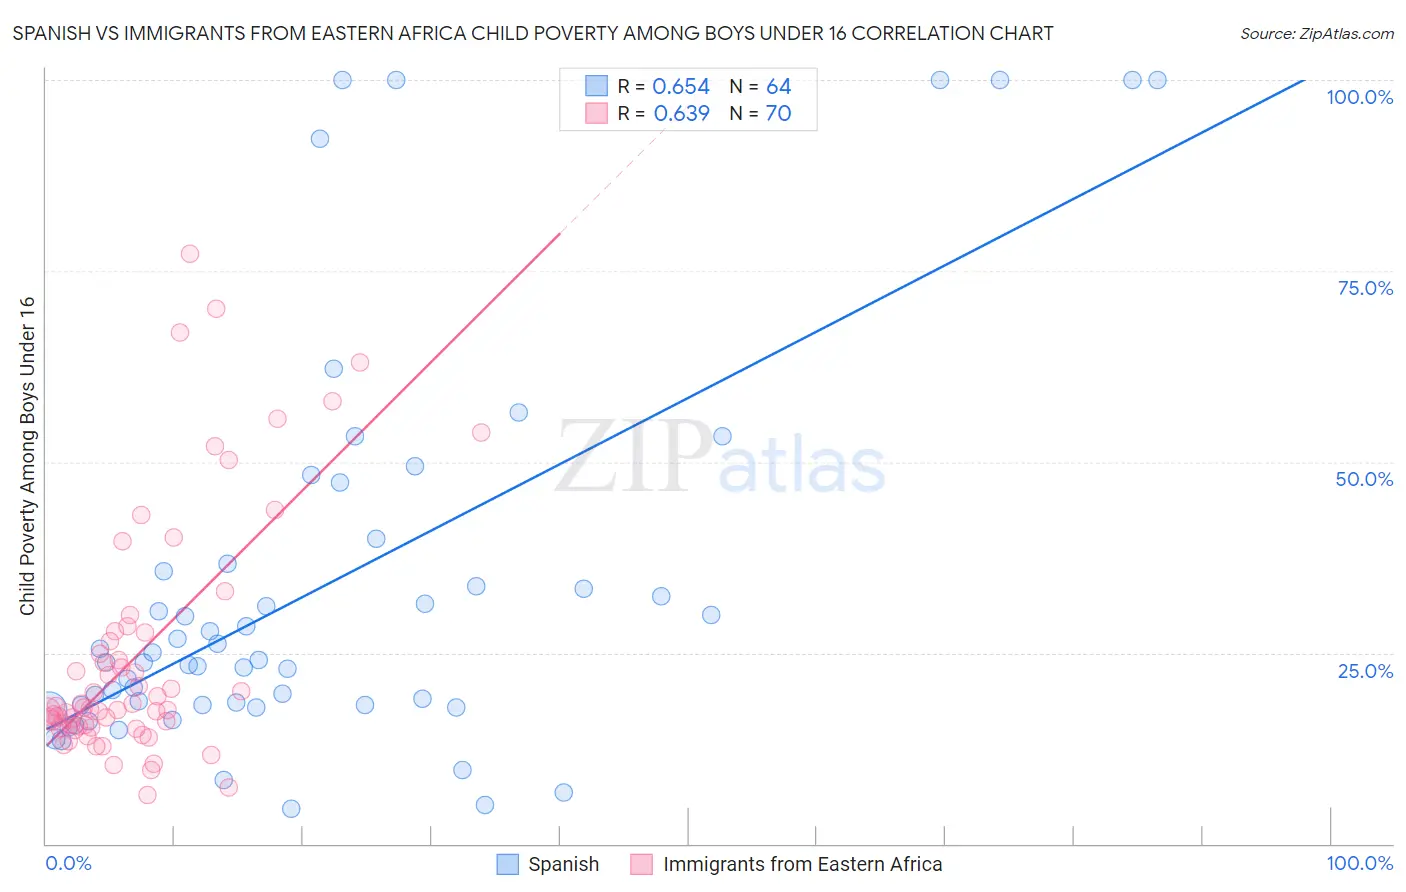 Spanish vs Immigrants from Eastern Africa Child Poverty Among Boys Under 16